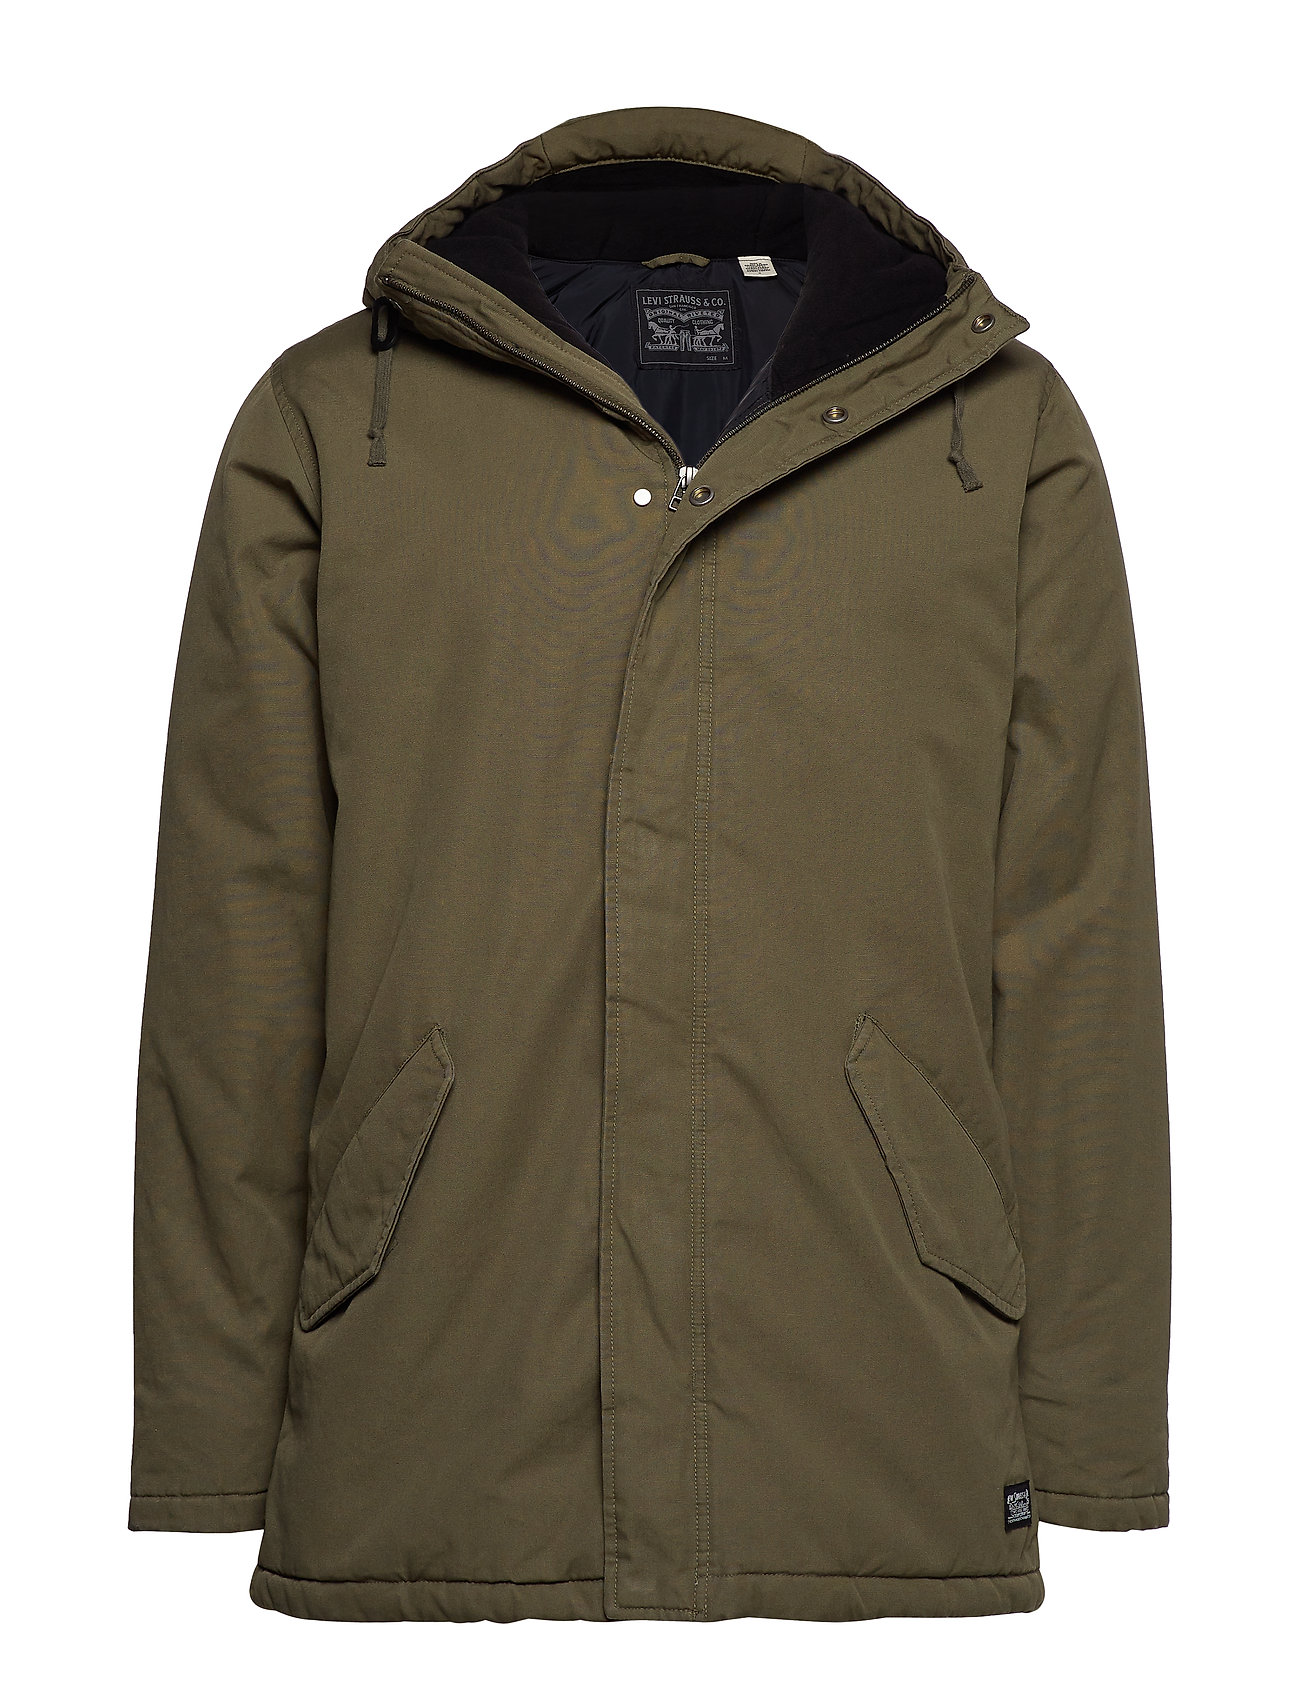 levis padded parka Online shopping has 